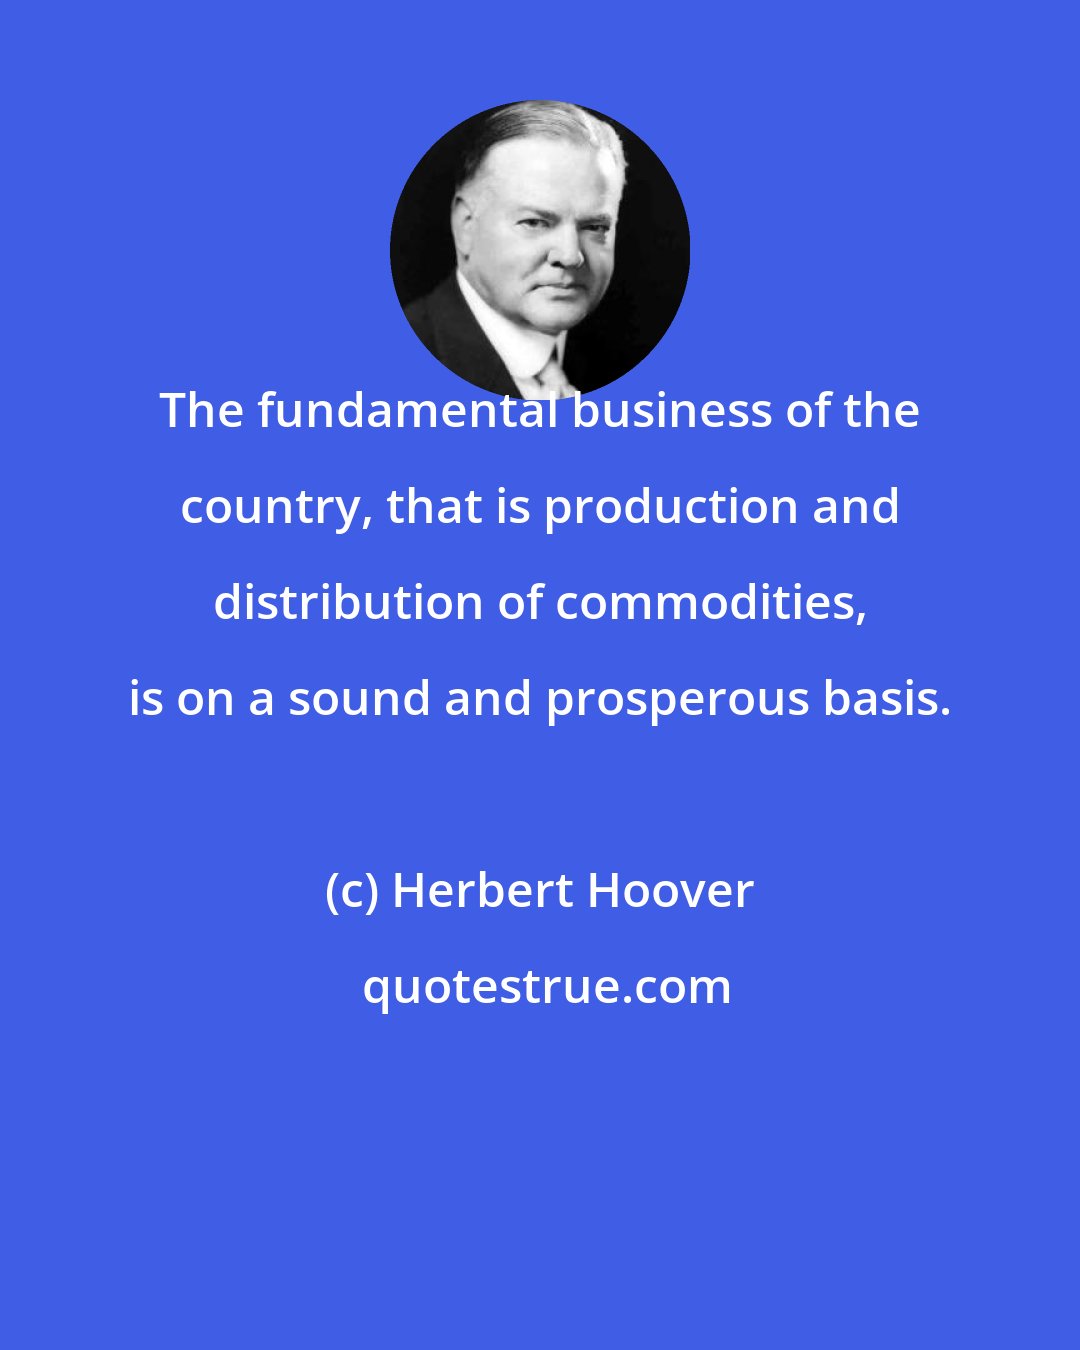 Herbert Hoover: The fundamental business of the country, that is production and distribution of commodities, is on a sound and prosperous basis.